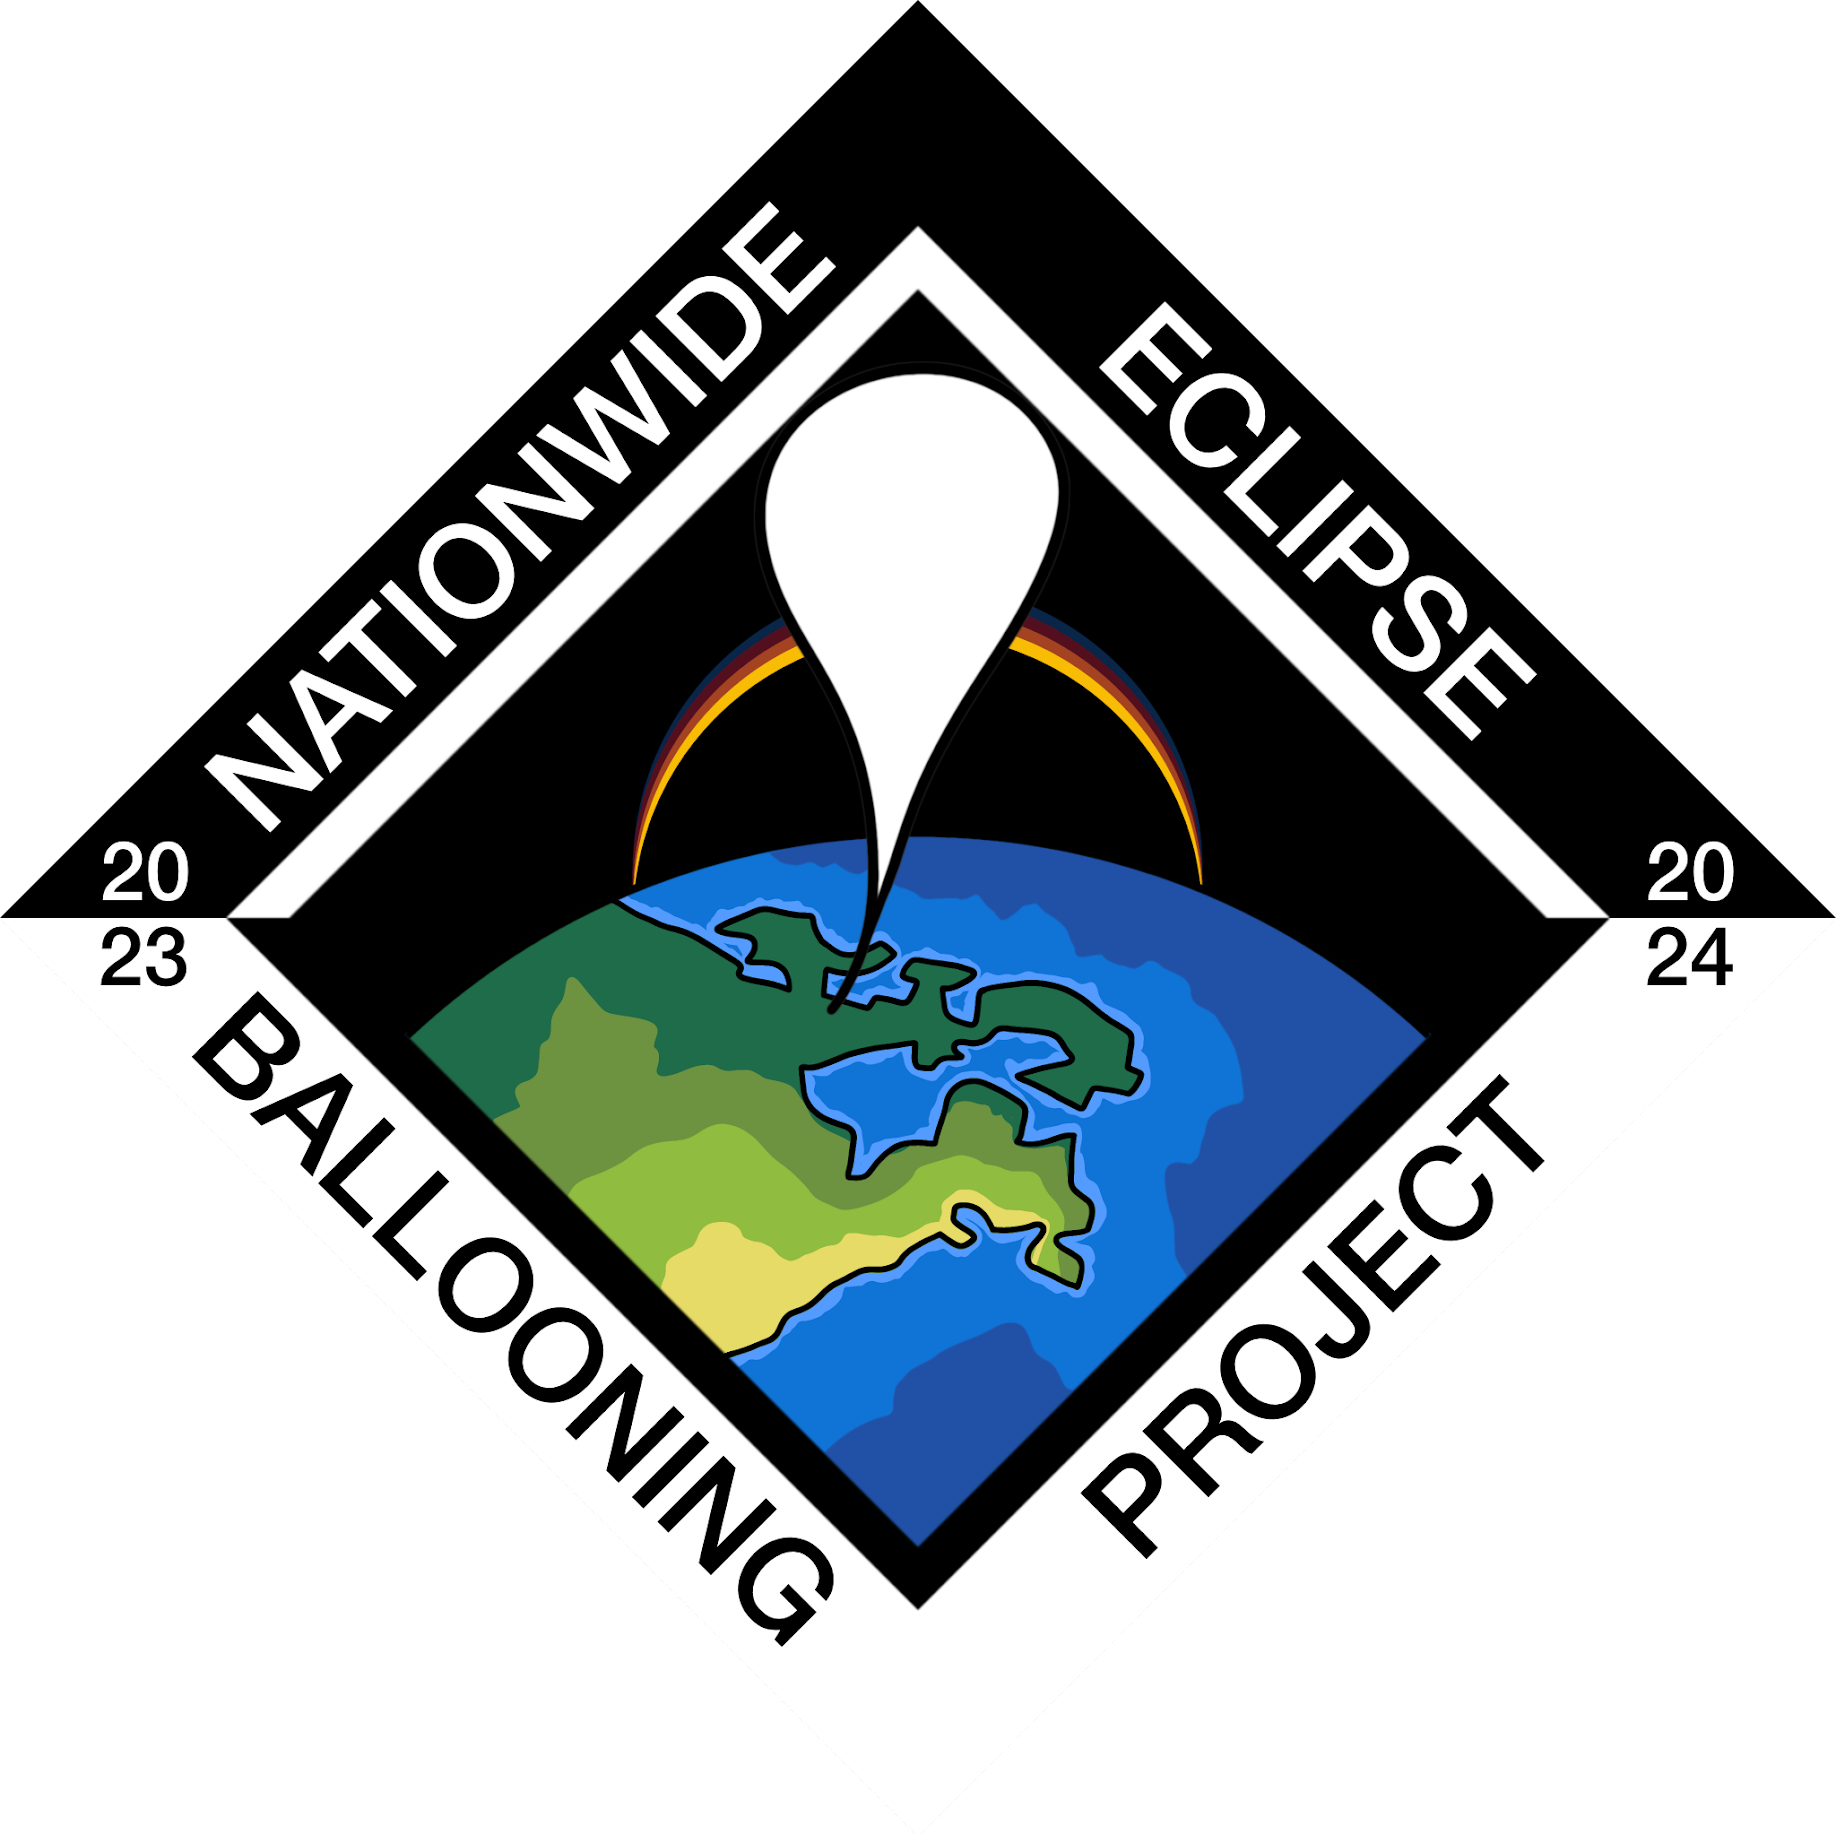 Diamond shape with a black border in the top and white in bottom; the words Nationwide Eclipse Ballooning Project are in the outside border; inside the diamond is a drawing of Earth with the North American continent, the eclipsed sun rising over it, and a white balloon in front of them all at the top.